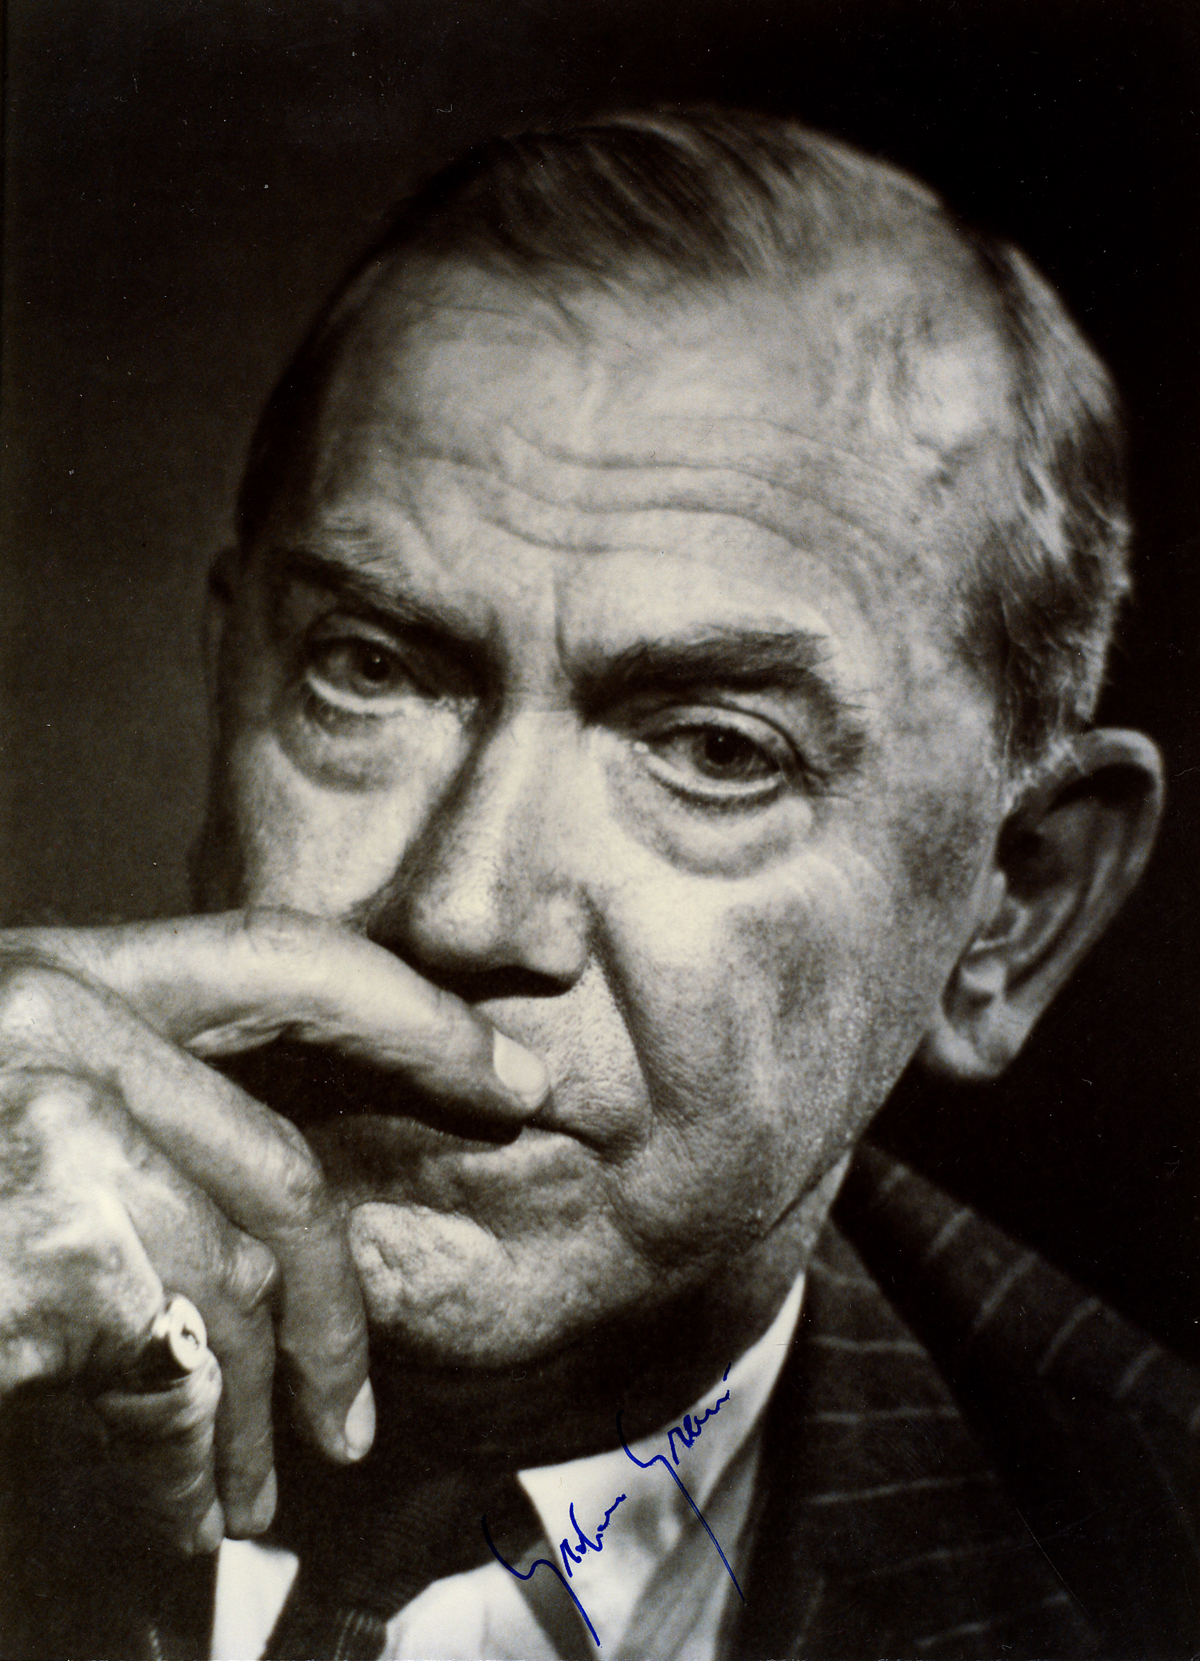 Fellows Find:  Authors find important insights in Graham Greene material